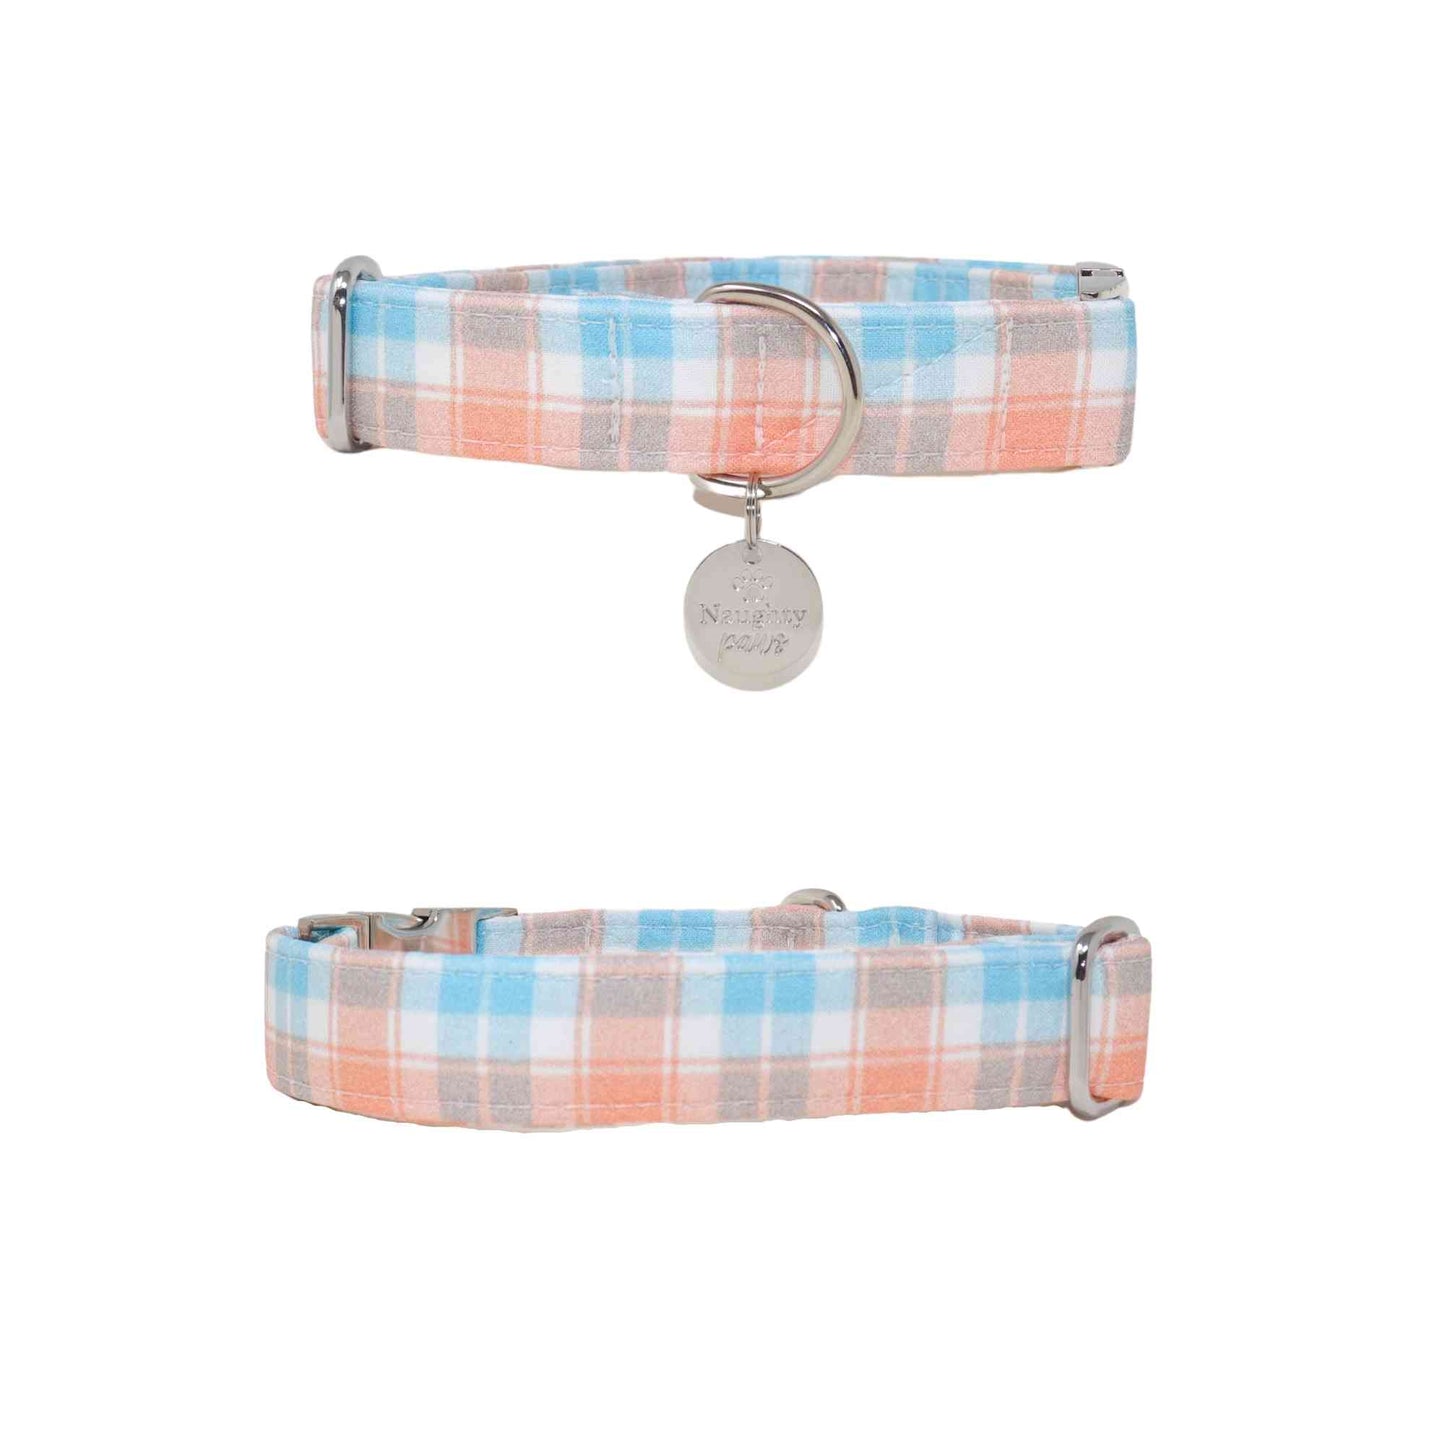 Crafted with care using only the finest materials, our collar is designed to provide your furry friend with the comfort and style they deserve. The unique blue and orange tartan pattern is neutral enough to suit any dog's style, making it a versatile accessory for any occasion.